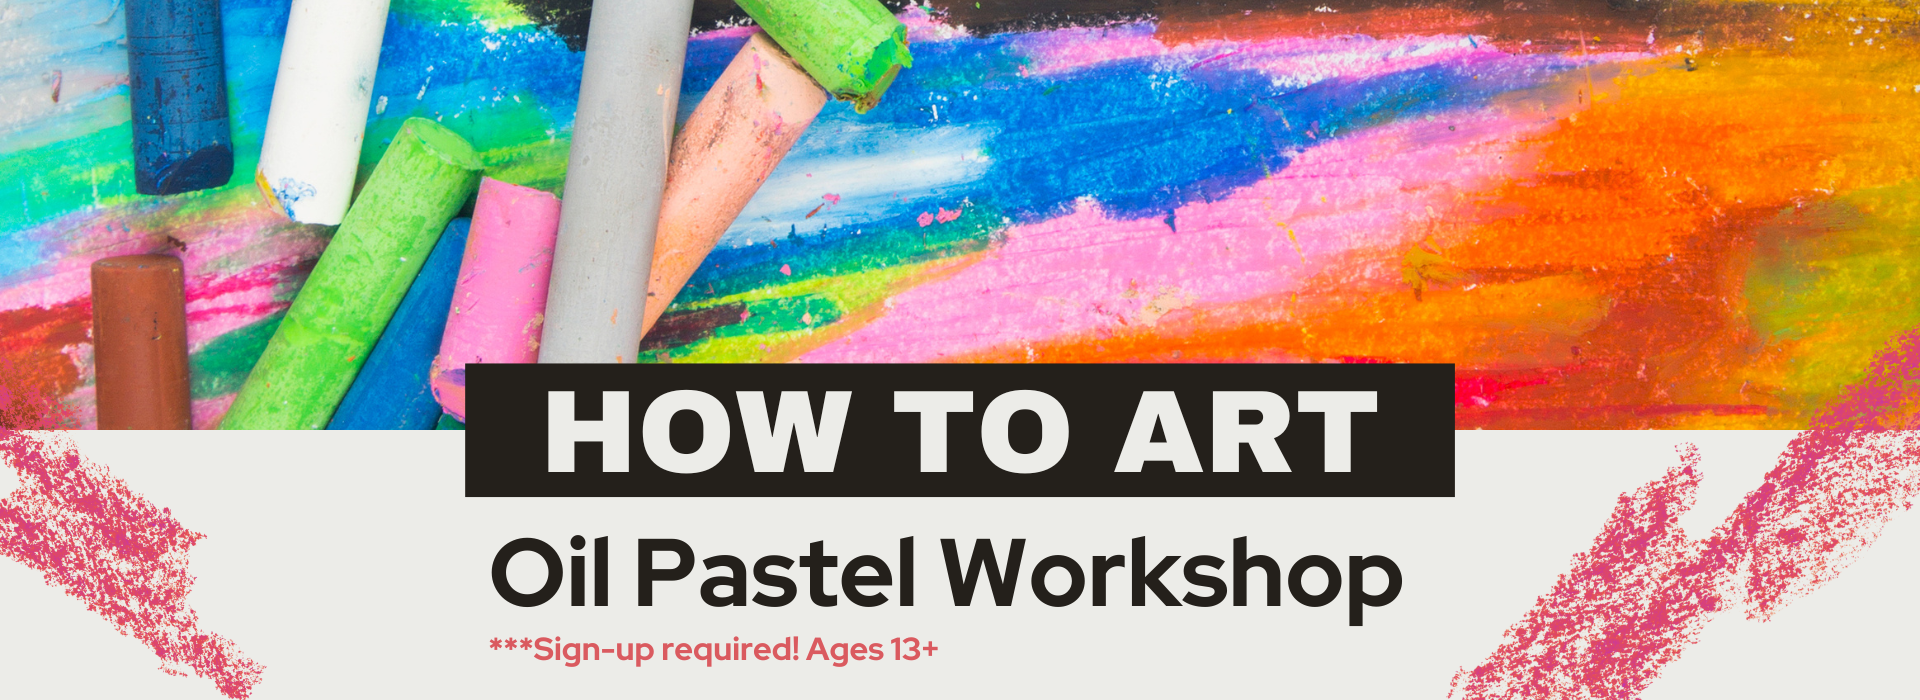 How To Art Monday, April 22nd at 6pm